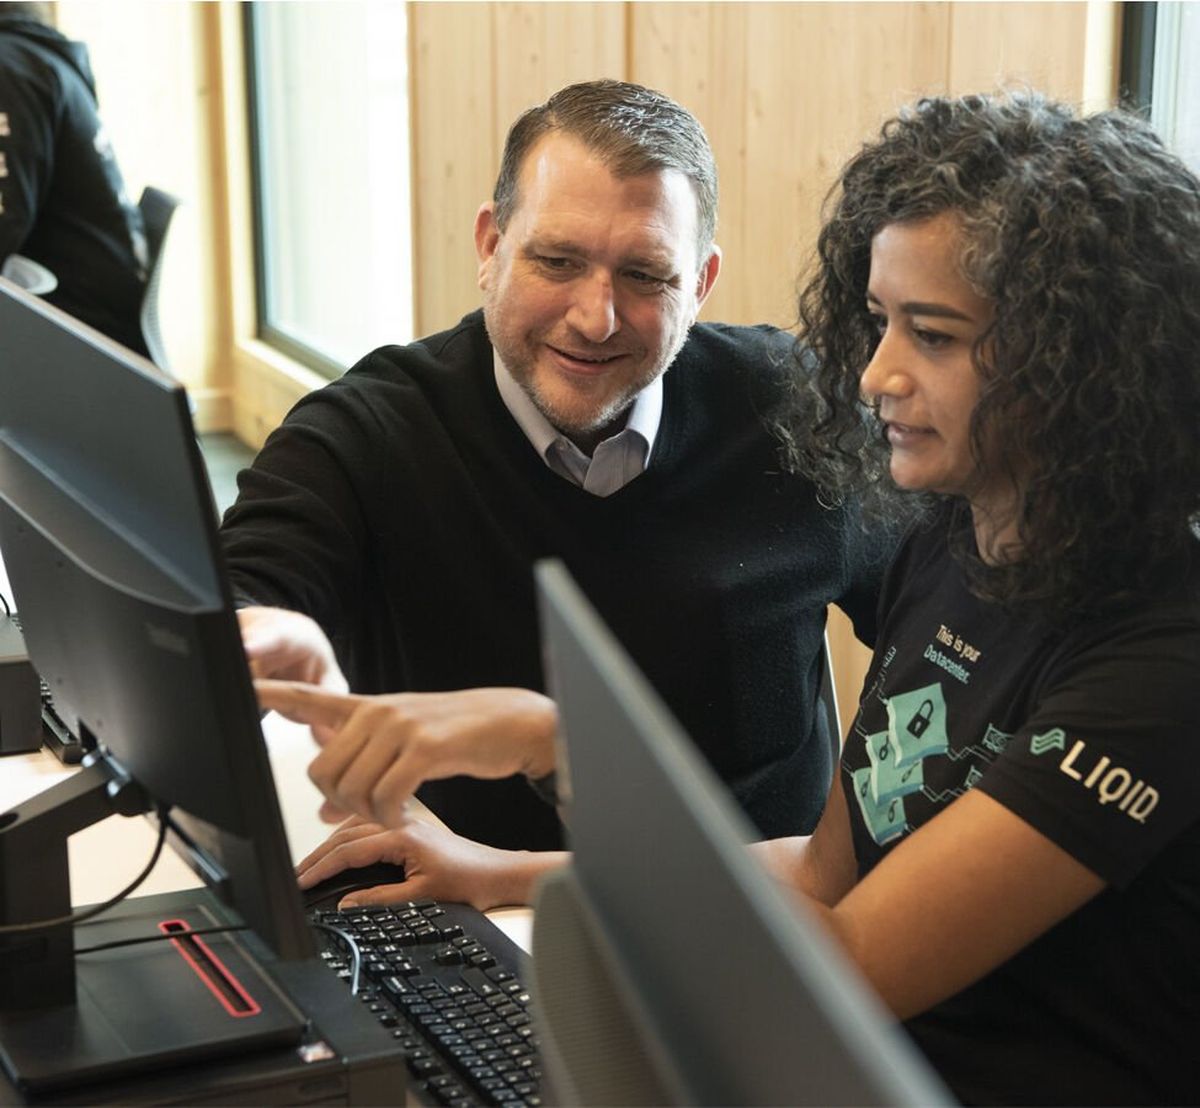 Stu Steiner, EWU assistant professor of computer science and electrical engineering, and student Amy Washington take part in the Spokane Mayor’s Cup Cybersecurity Competition in this February 2022 photo. Steiner is working with students to assist local governments in preventing cyberattacks.  (Courtesy of Eastern Washington University)